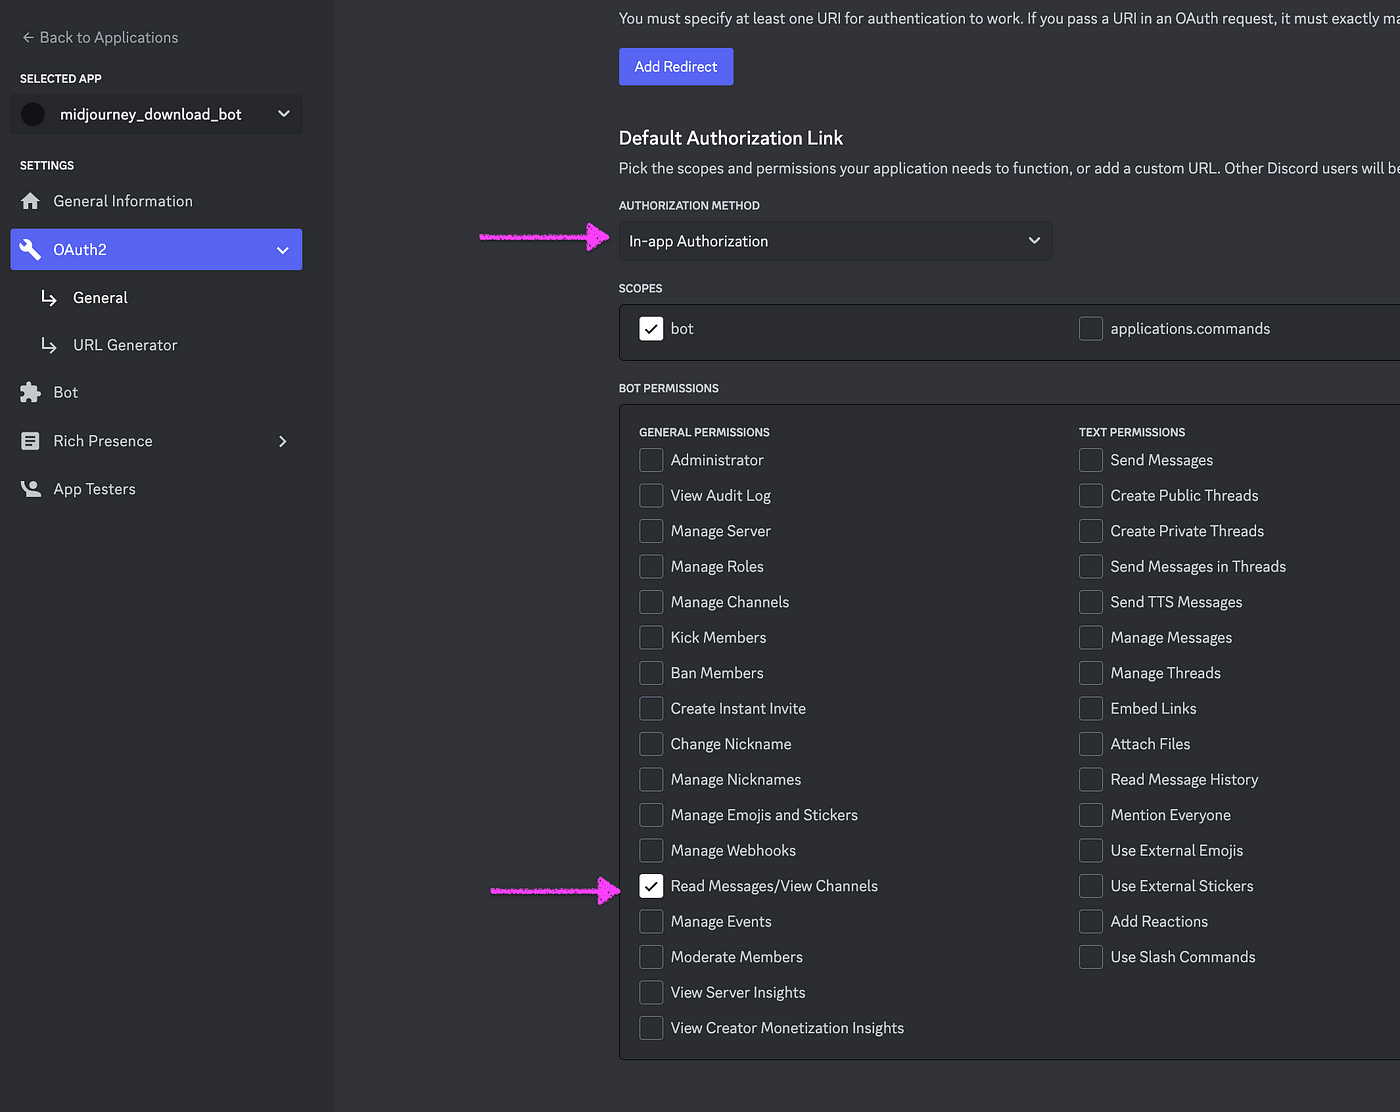 How to Create a Discord Bot to Download Midjourney Images